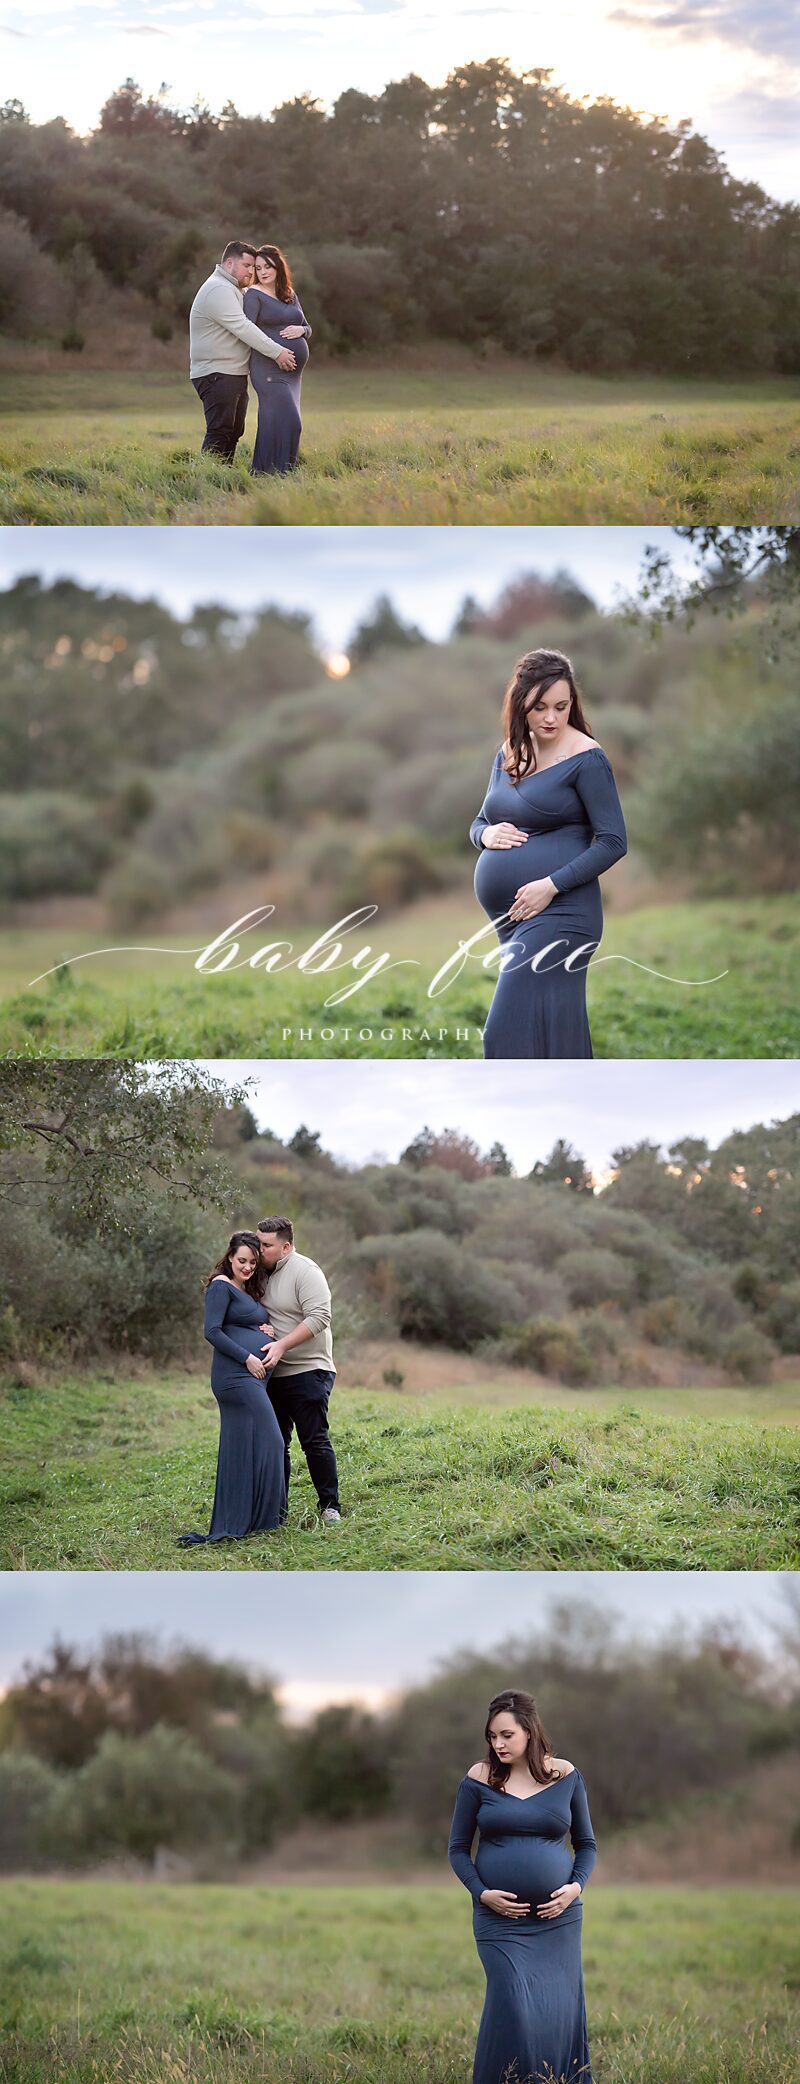 outdoor maternity photos session